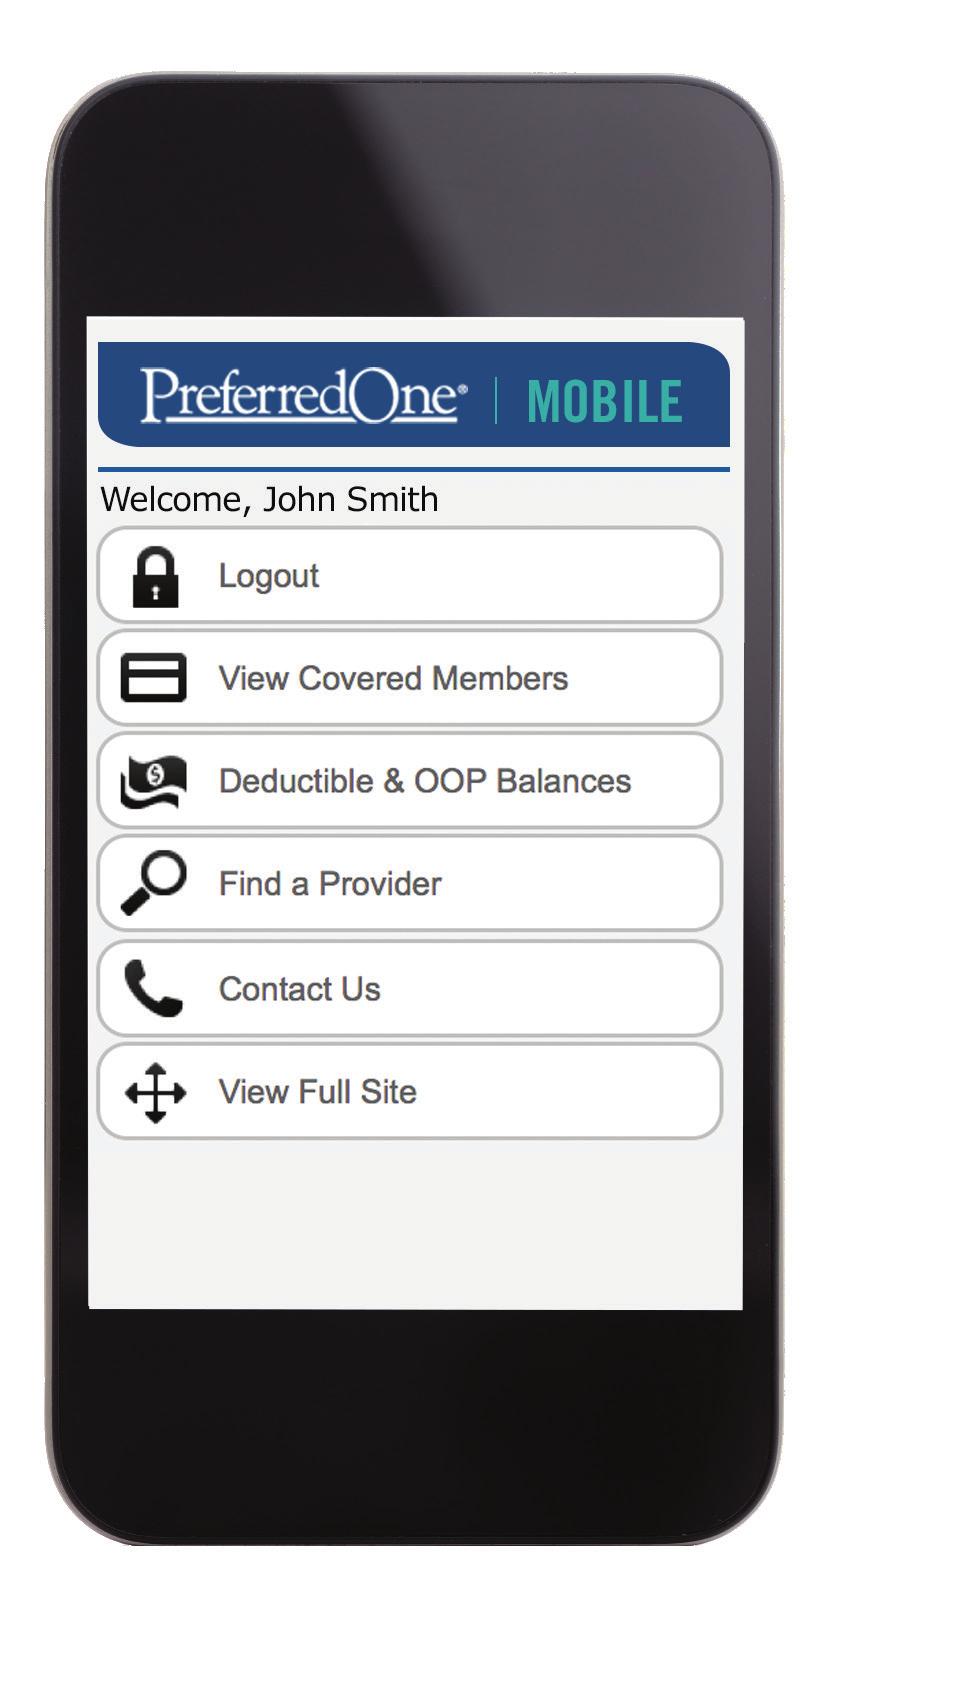 On the Go PreferredOne s Mobile Website Now you can get valuable PreferredOne benefit information on your mobile device.